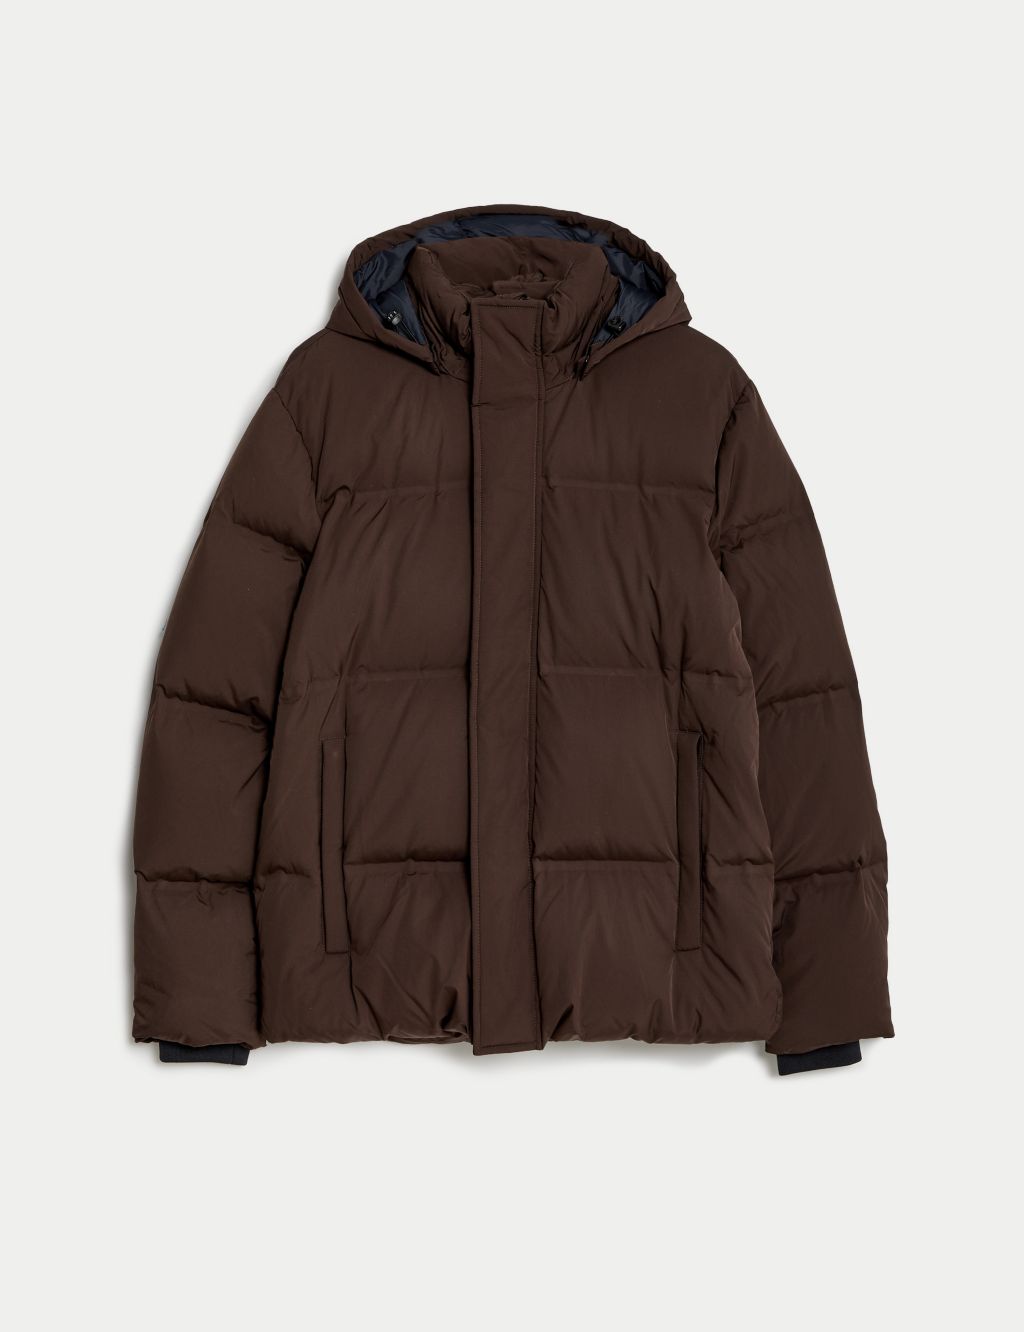 Feather & Down Puffer Jacket with Stormwear™ image 2